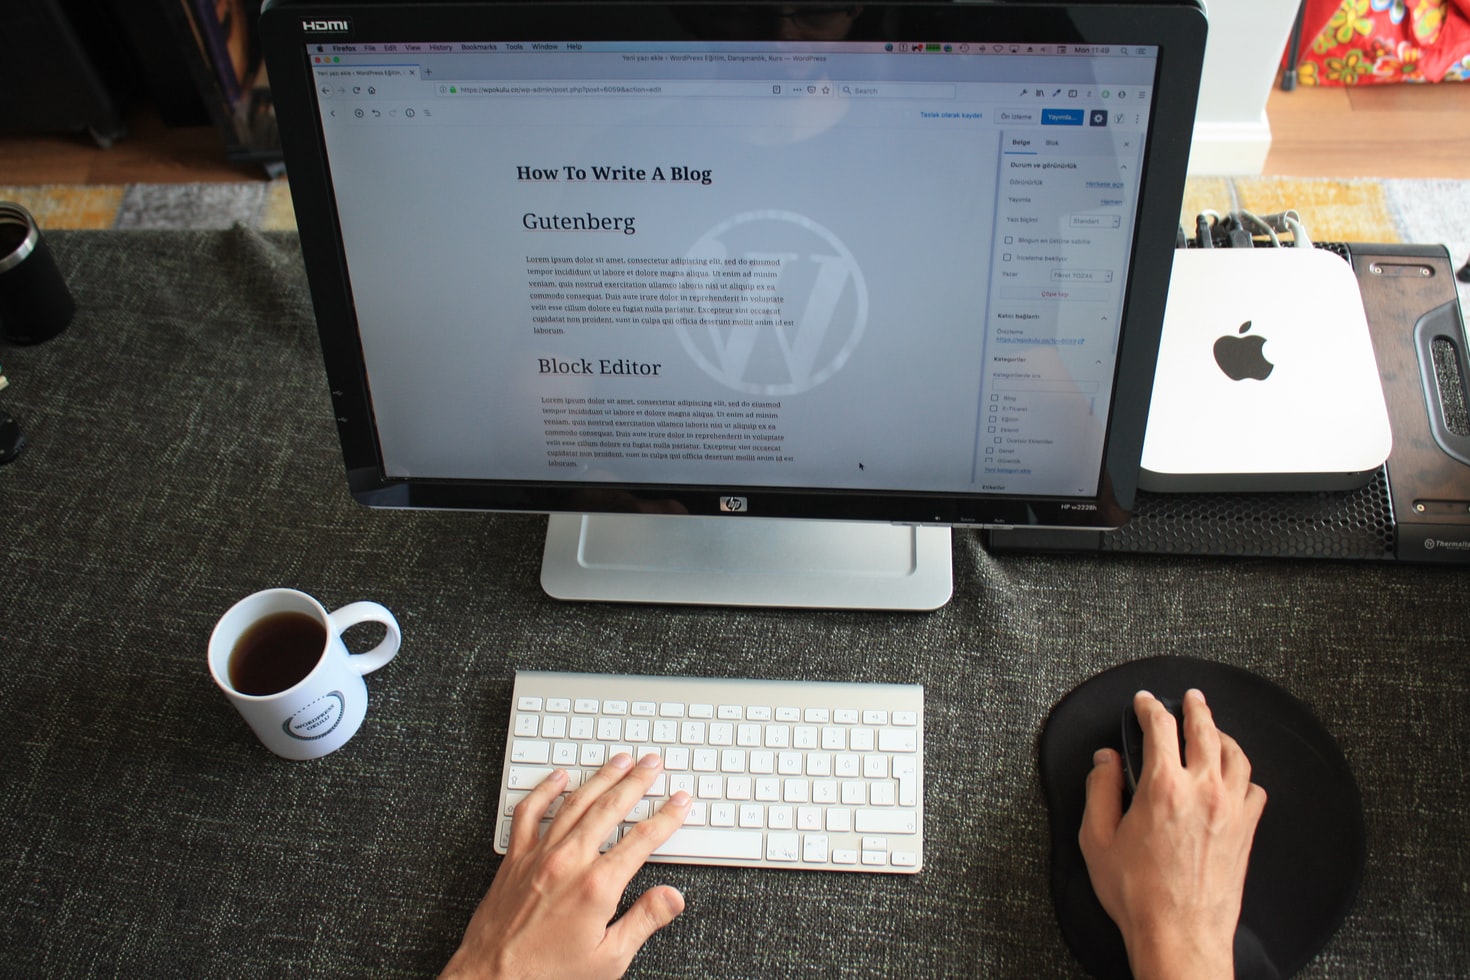 9 Ways to Tell if a WordPress Article is Legit